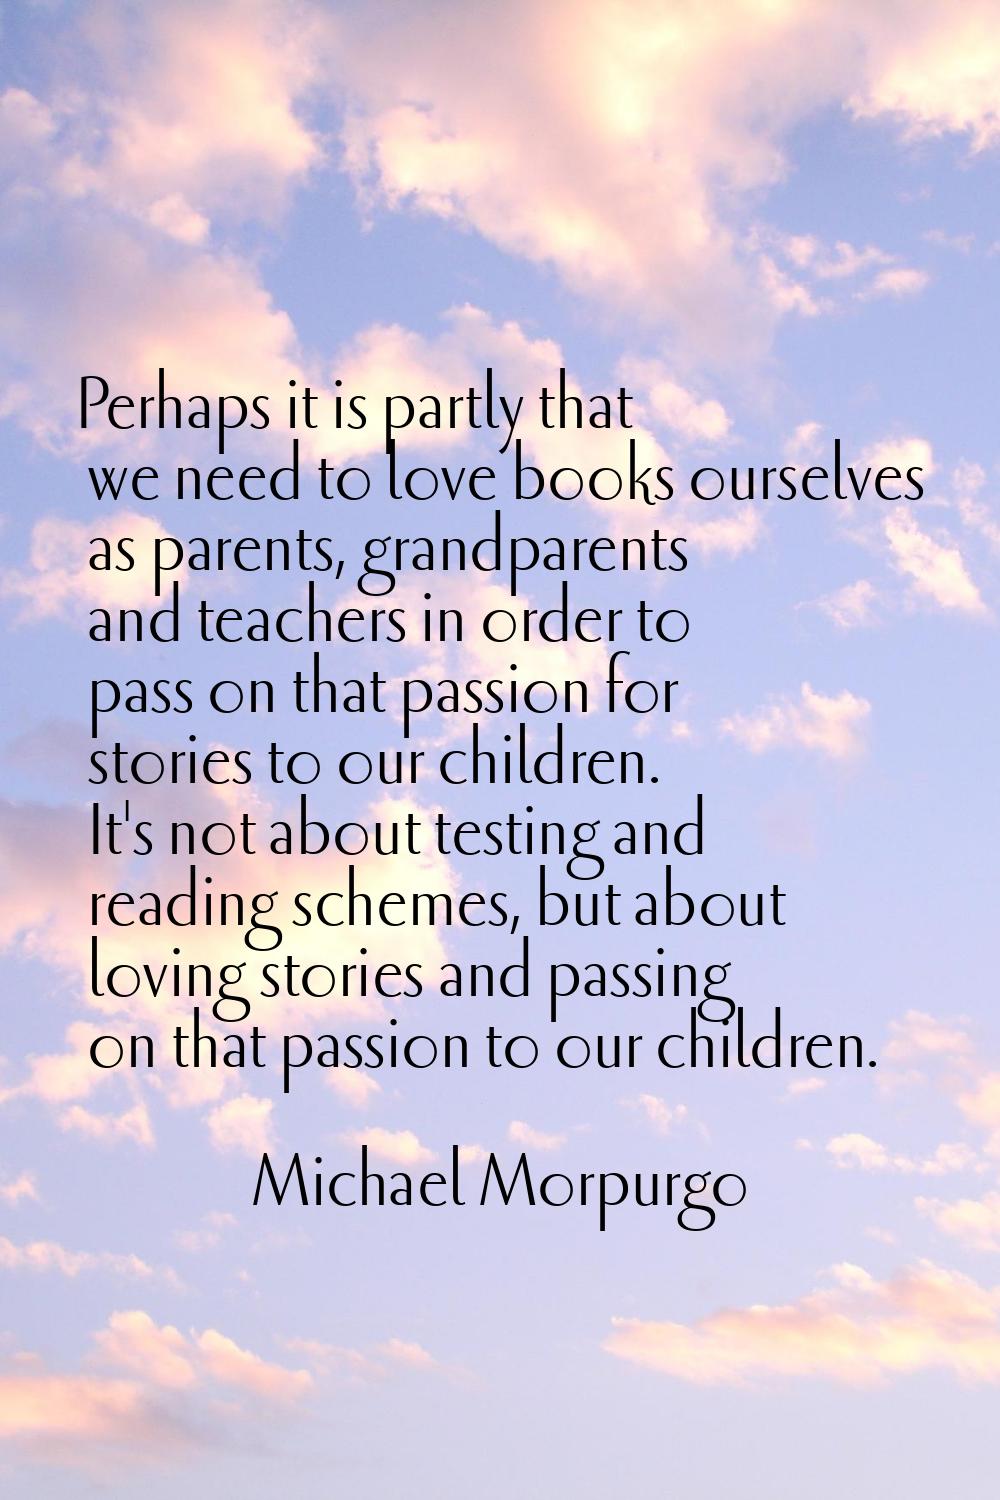 Perhaps it is partly that we need to love books ourselves as parents, grandparents and teachers in 